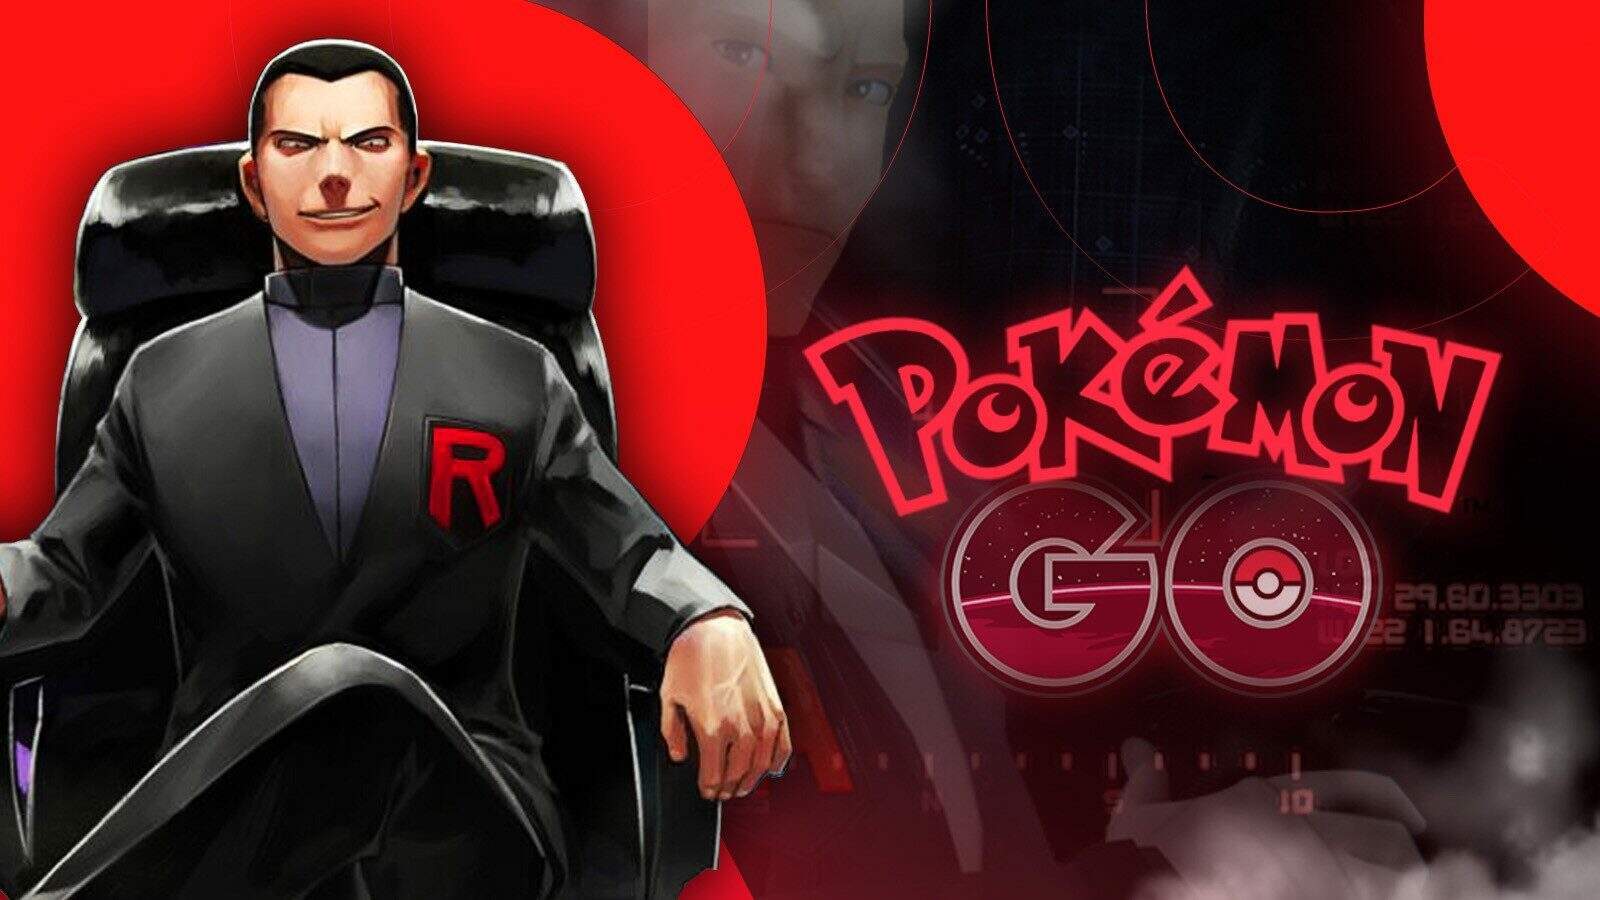 Pokémon go is invaded by team rocket | 60a2bc54 cover team rocket | married games news | android, mobile, multiplayer, niantic, nintendo, pokemon, pokemon go, singleplayer | pokemon go